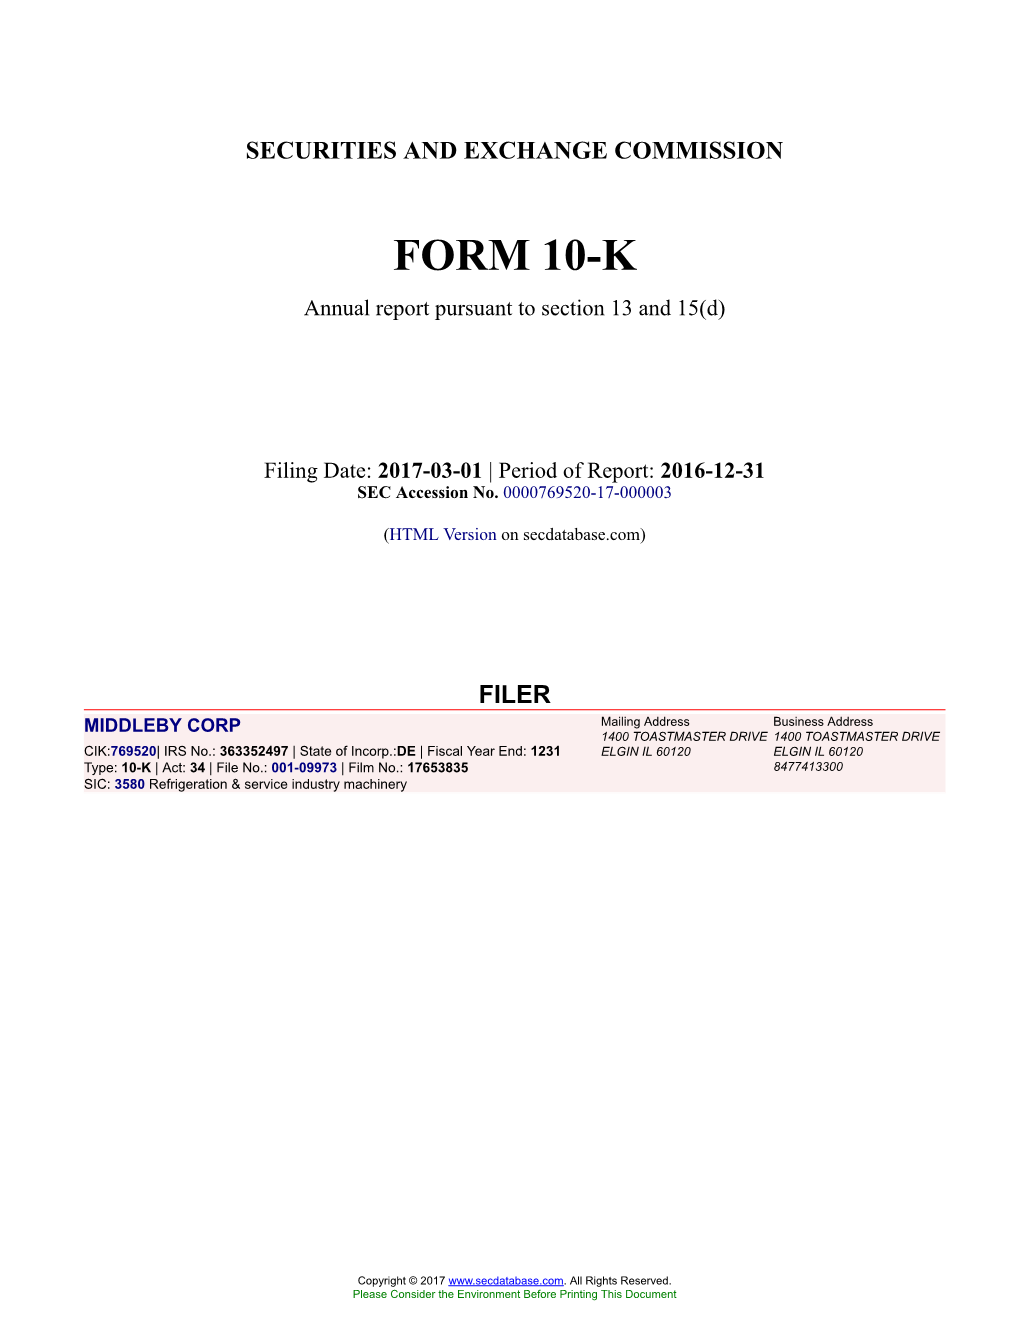 MIDDLEBY CORP Form 10-K Annual Report Filed 2017-03-01